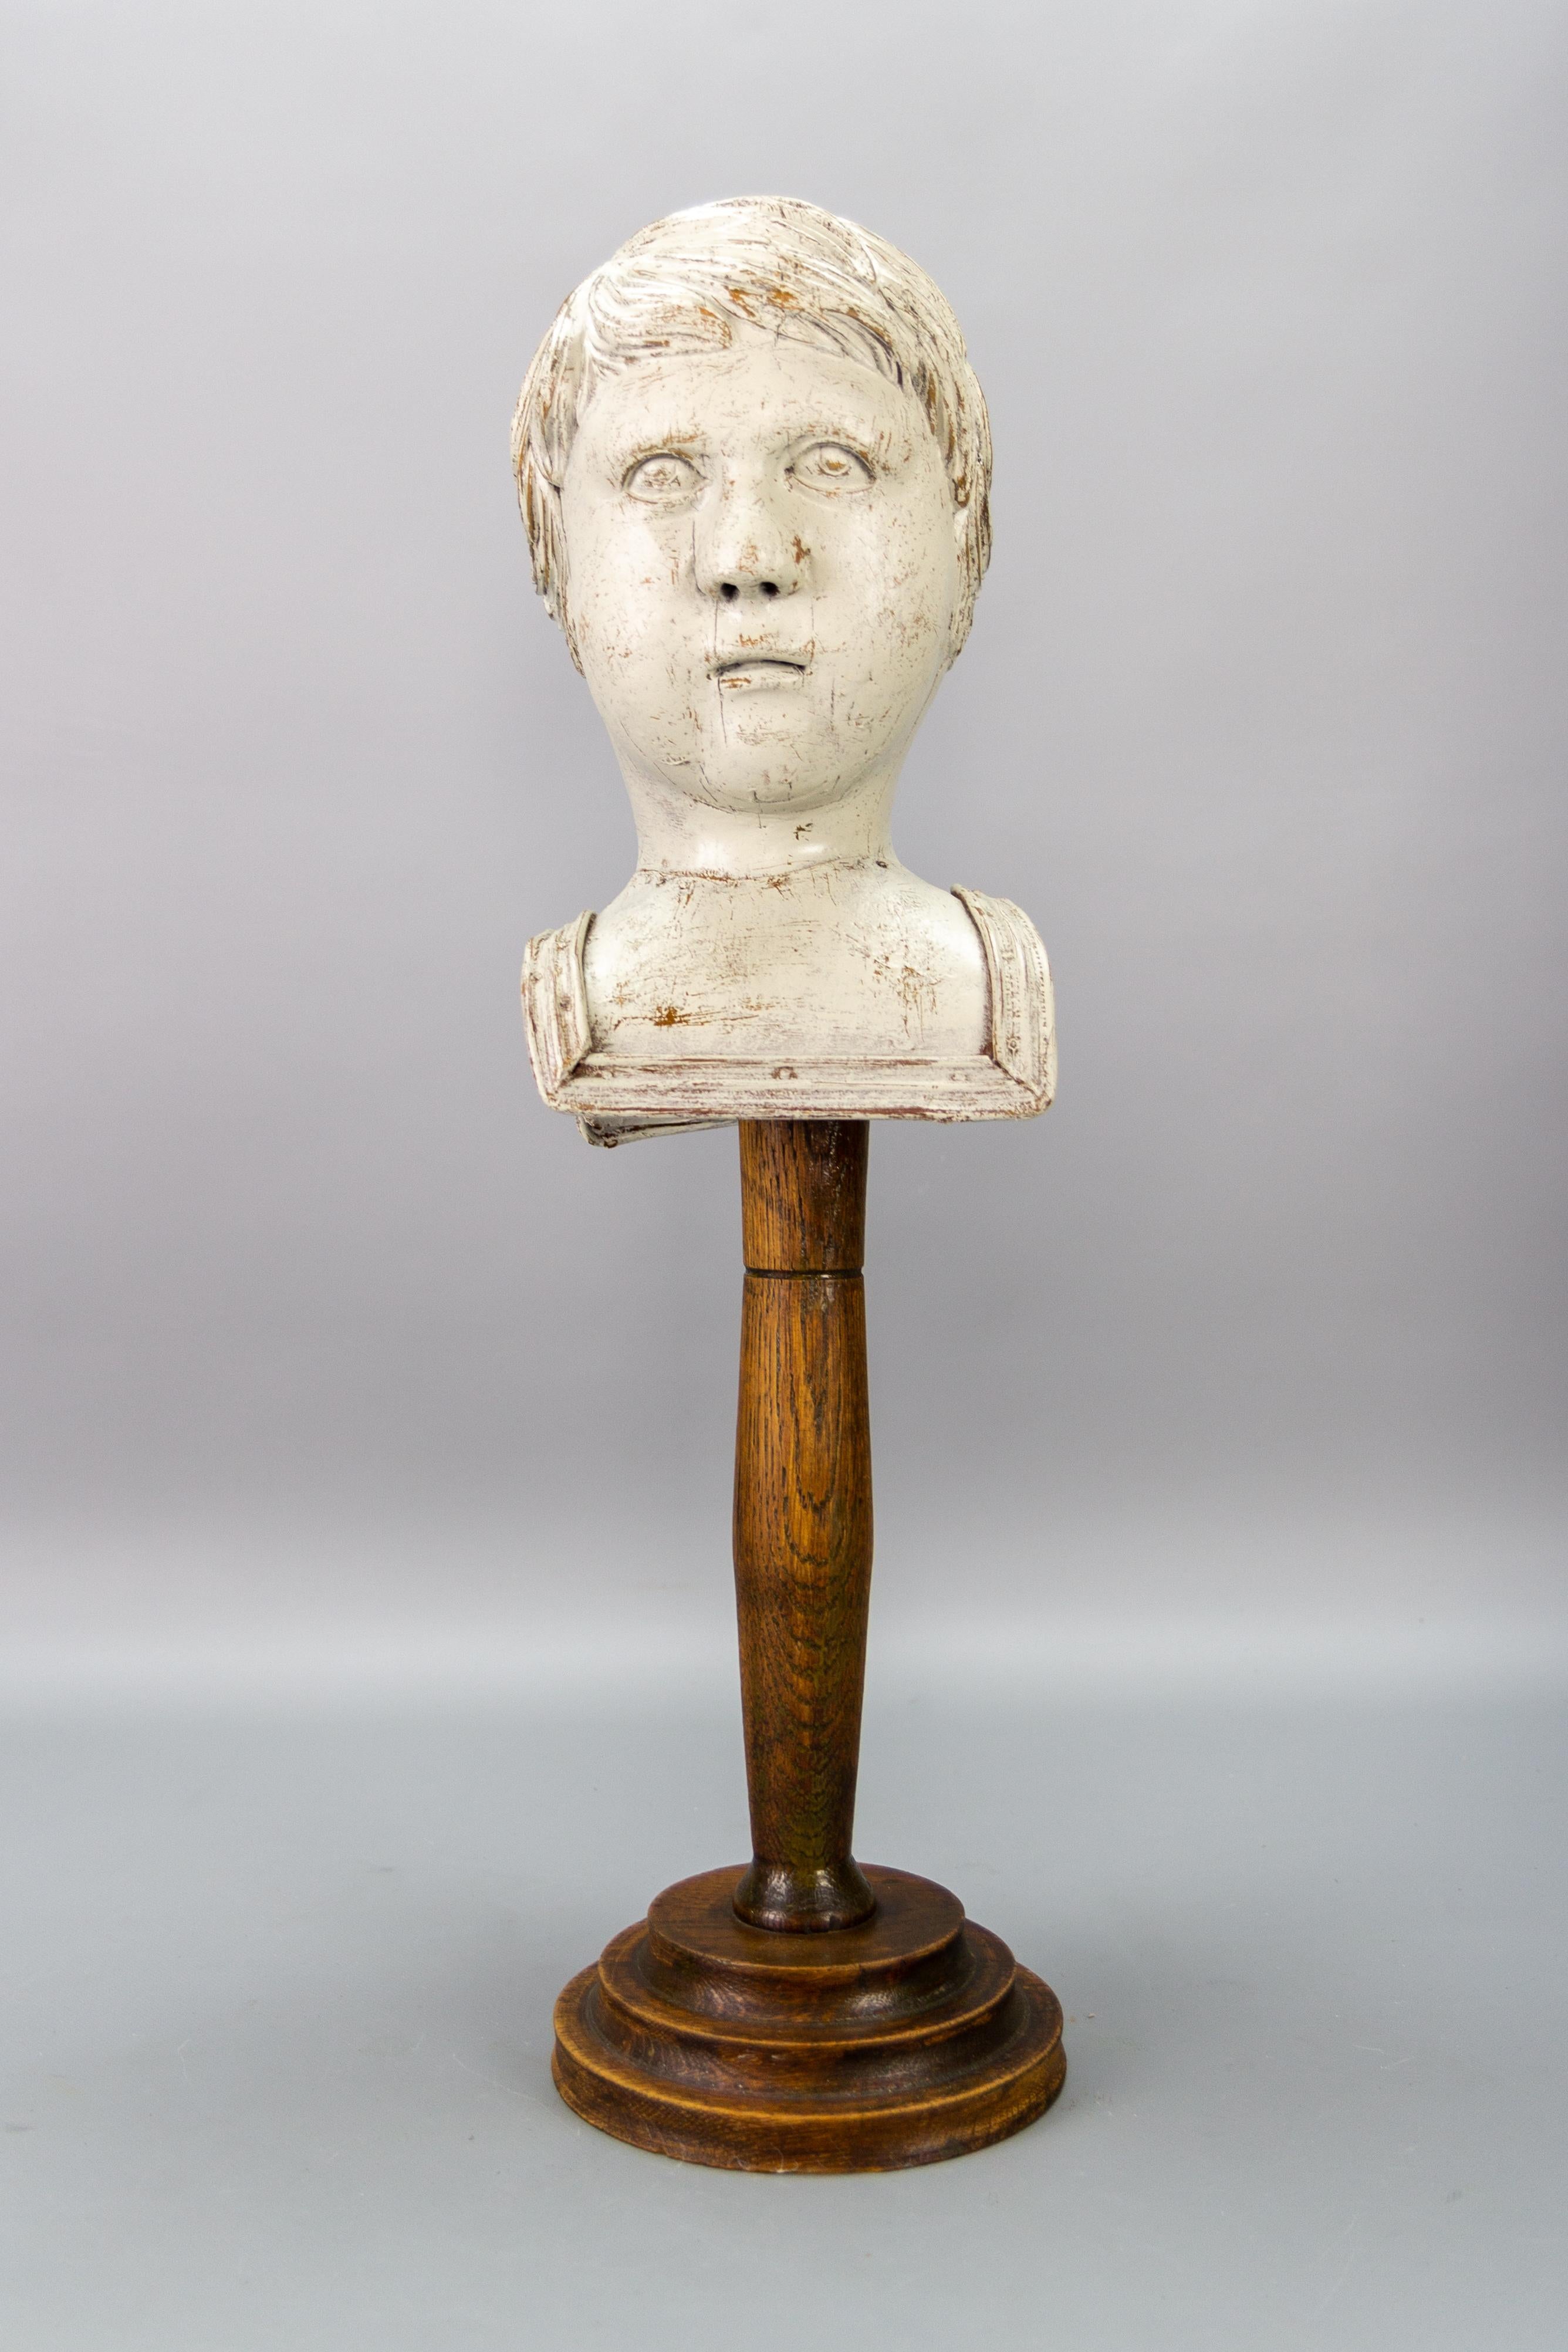 Whitewashed carved wooden sculpture head or bust on a dark brown pedestal, France, circa the 1920s.
This adorable decor - a sculpture of a boy's or angel's head or bust has been carved of oakwood and whitewashed. The pedestal was made in 1920